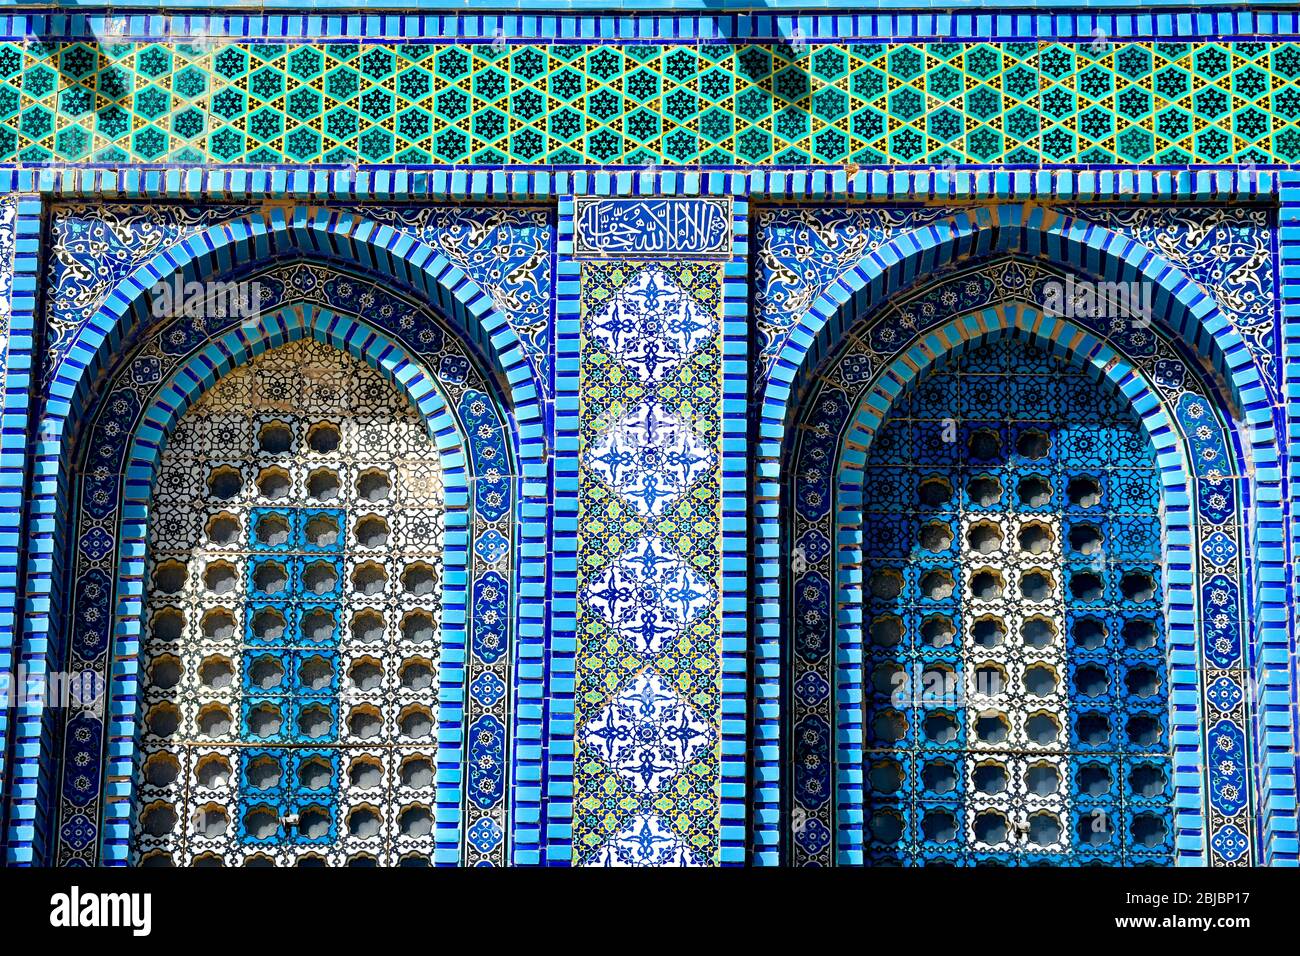 Detail of arabic mosaic with glazed ceramic tiles in byzantine style in the Dome of The Rock, an Islamic shrine the Old City of Jerusalem, Israel. Stock Photo